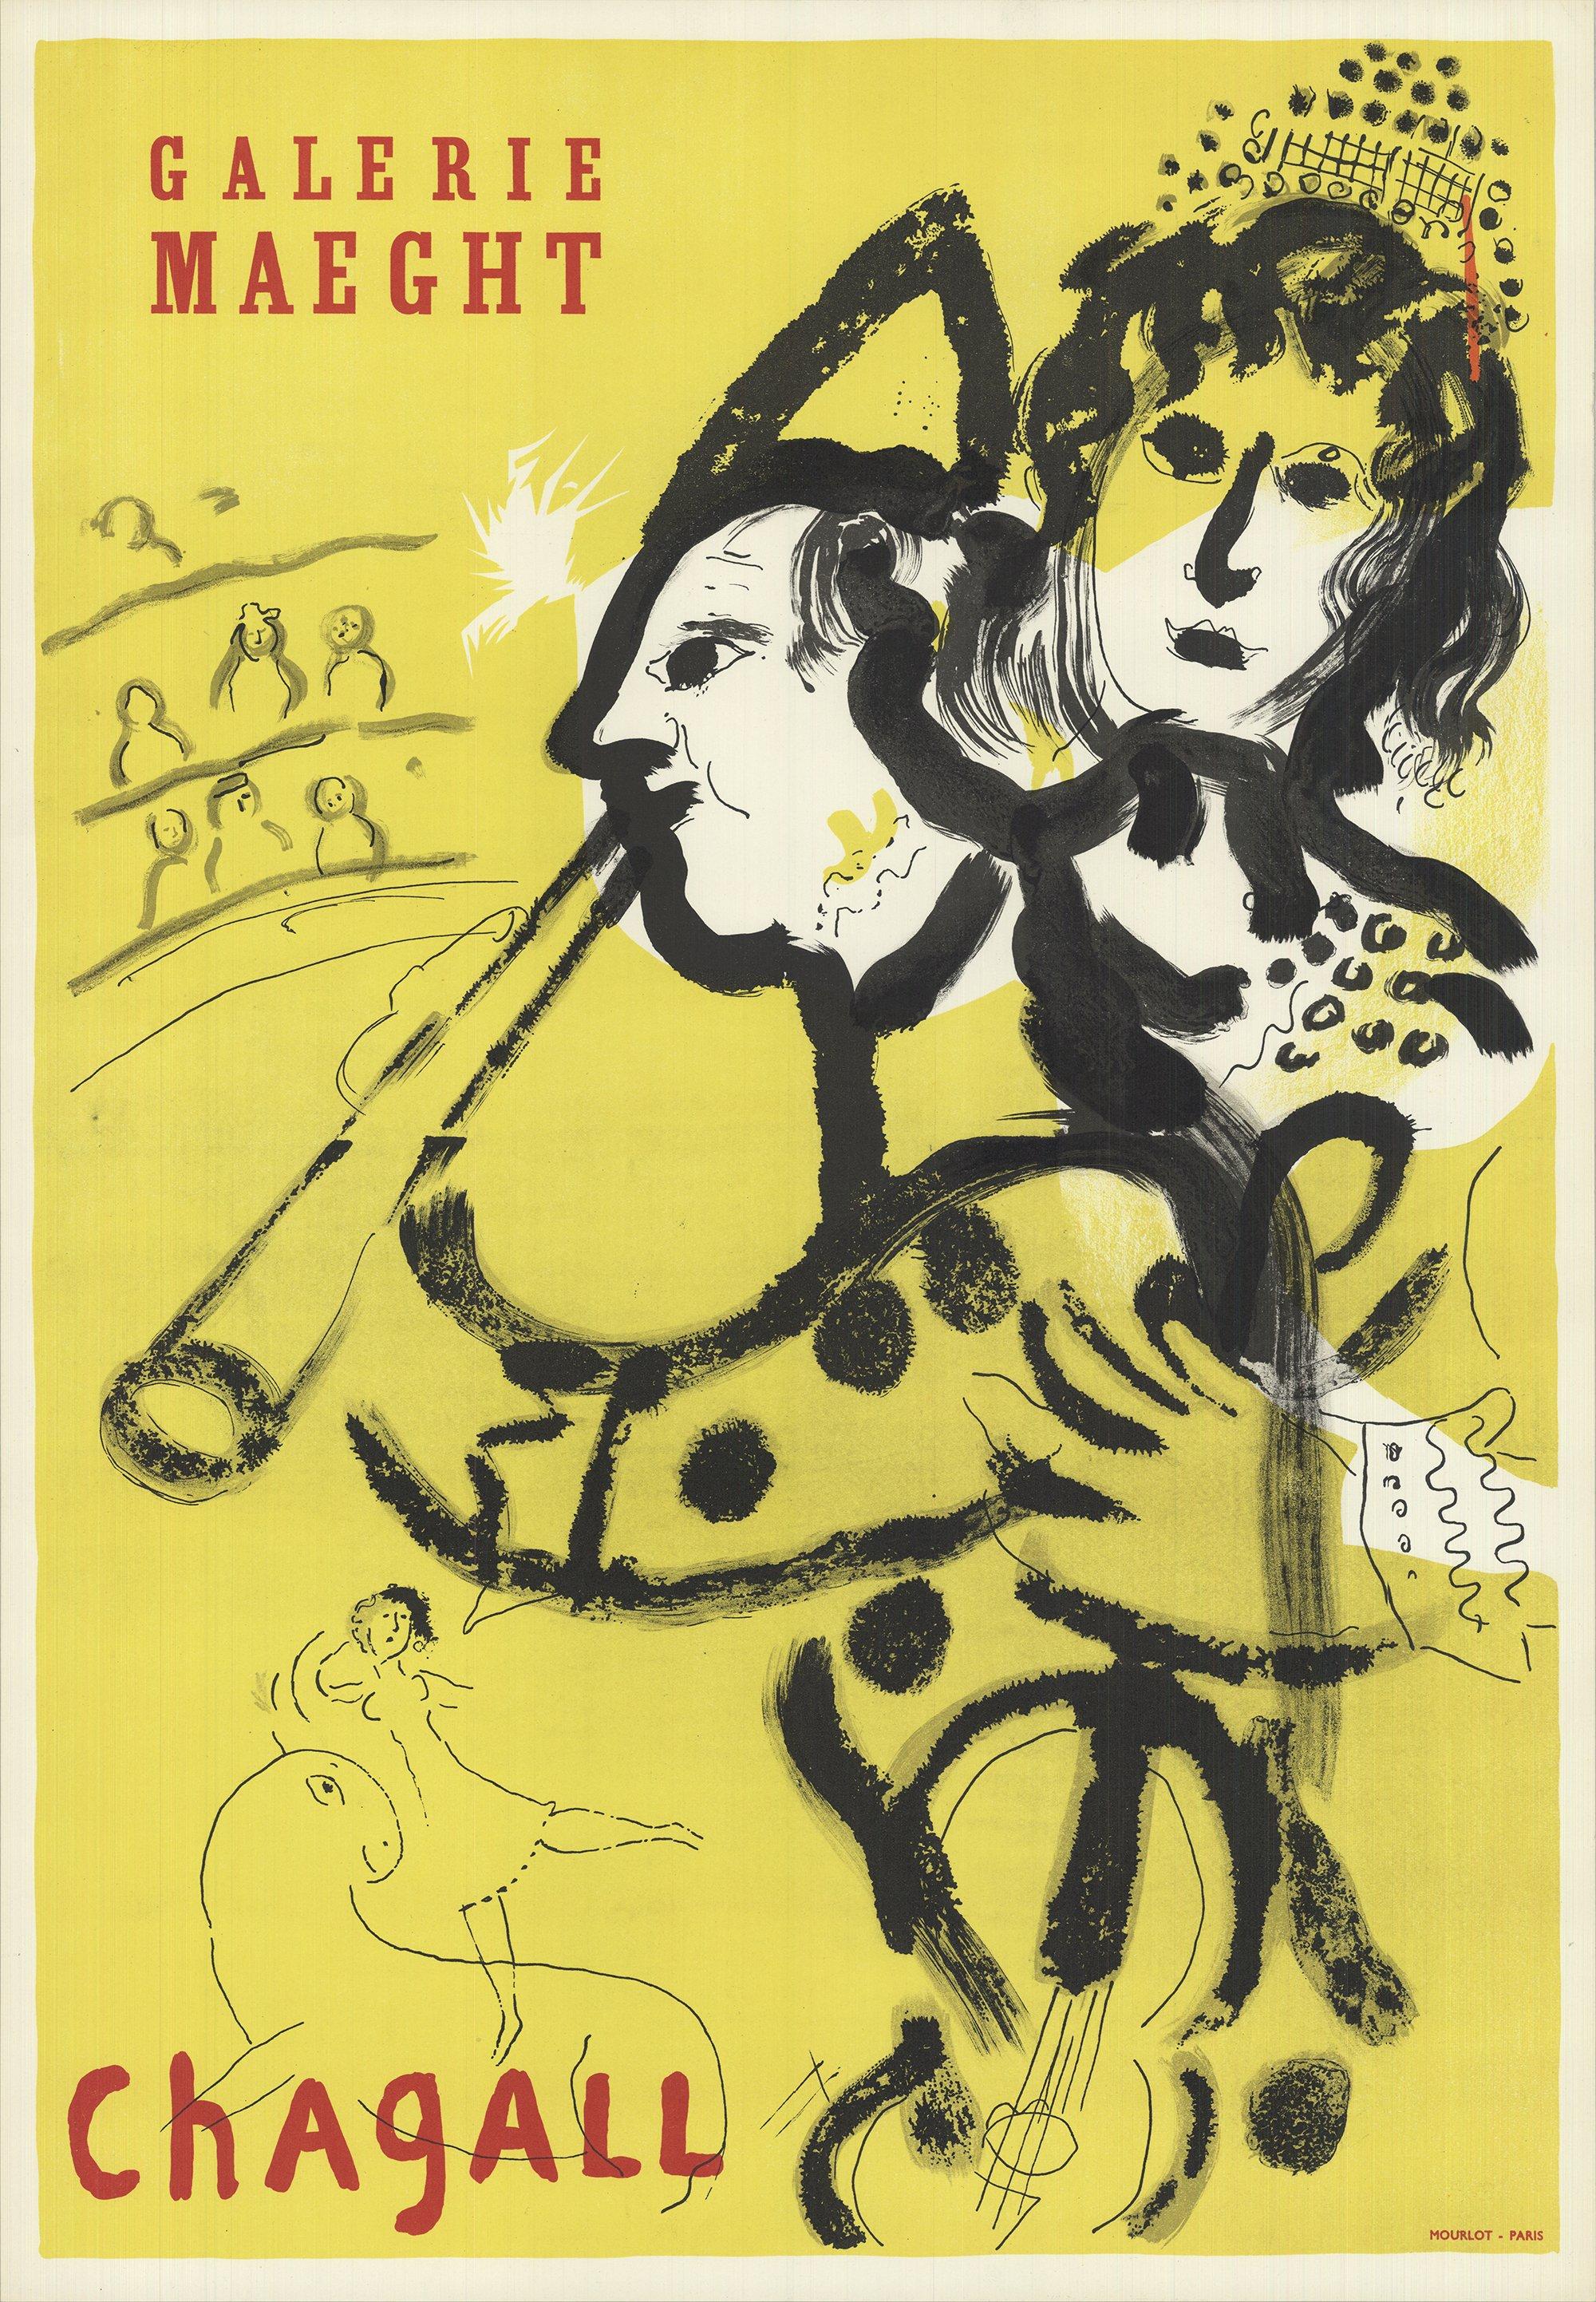 Did Marc Chagall personally sign his bookplates?